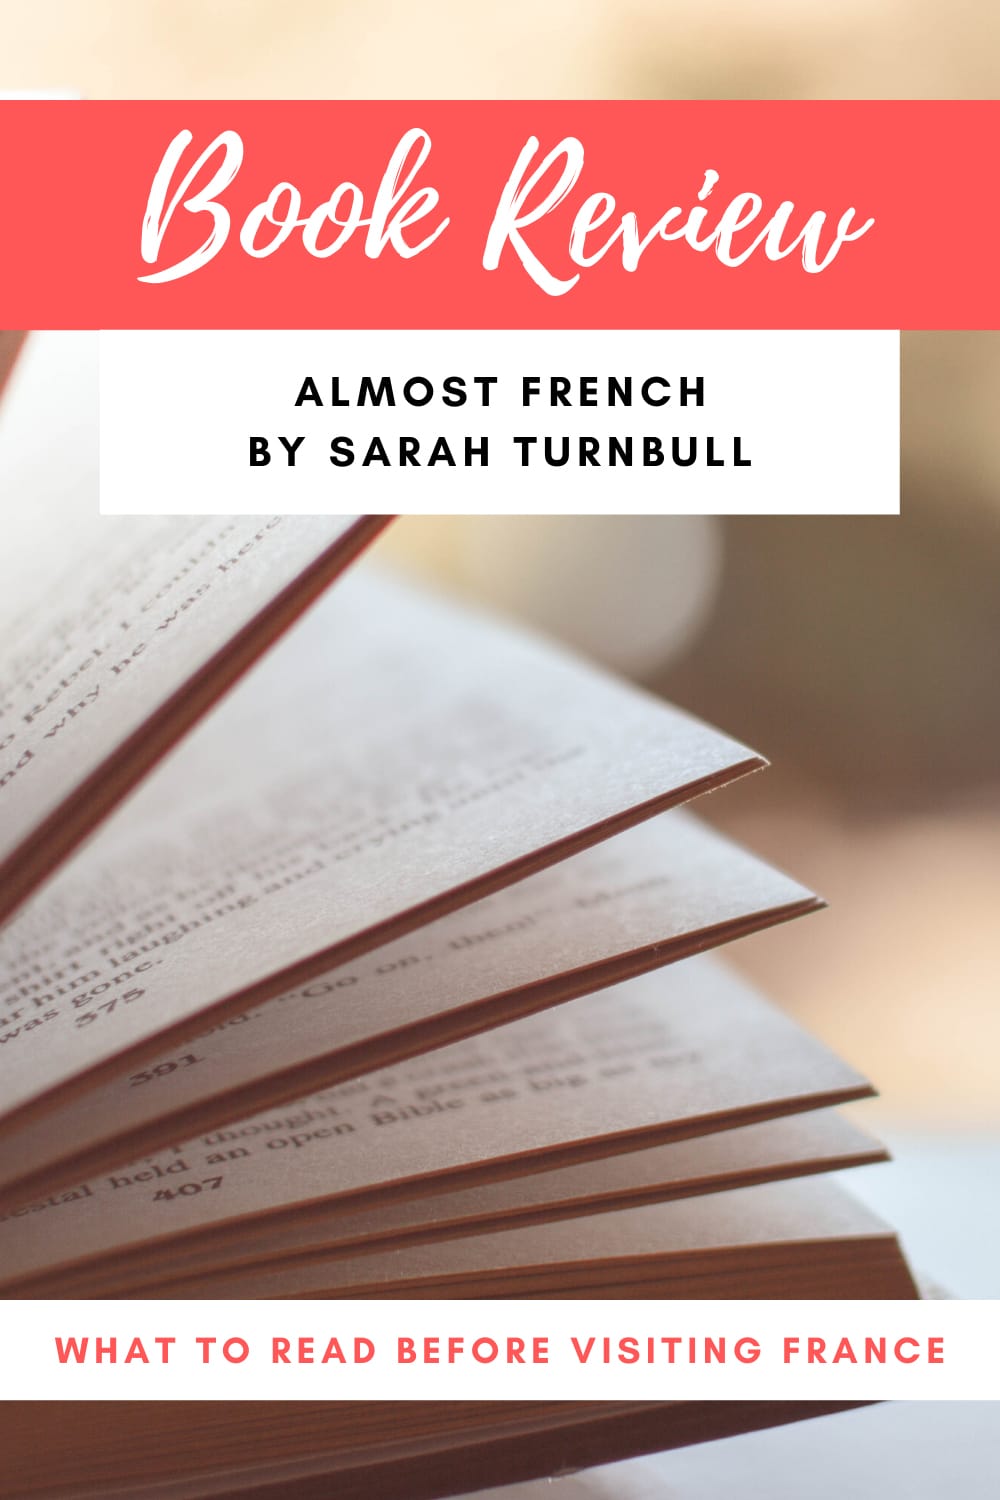 Book Review: Almost French by Sarah Turnbull | Full Time Explorer | Travel Books | Travel Memoirs | Books About Traveling | Vacation Reads | Beach Reads | Books About France | Expats in France | Travel Genre | Airplane Entertainment #travel #book #memoir #travelmemoir #entertainment #france